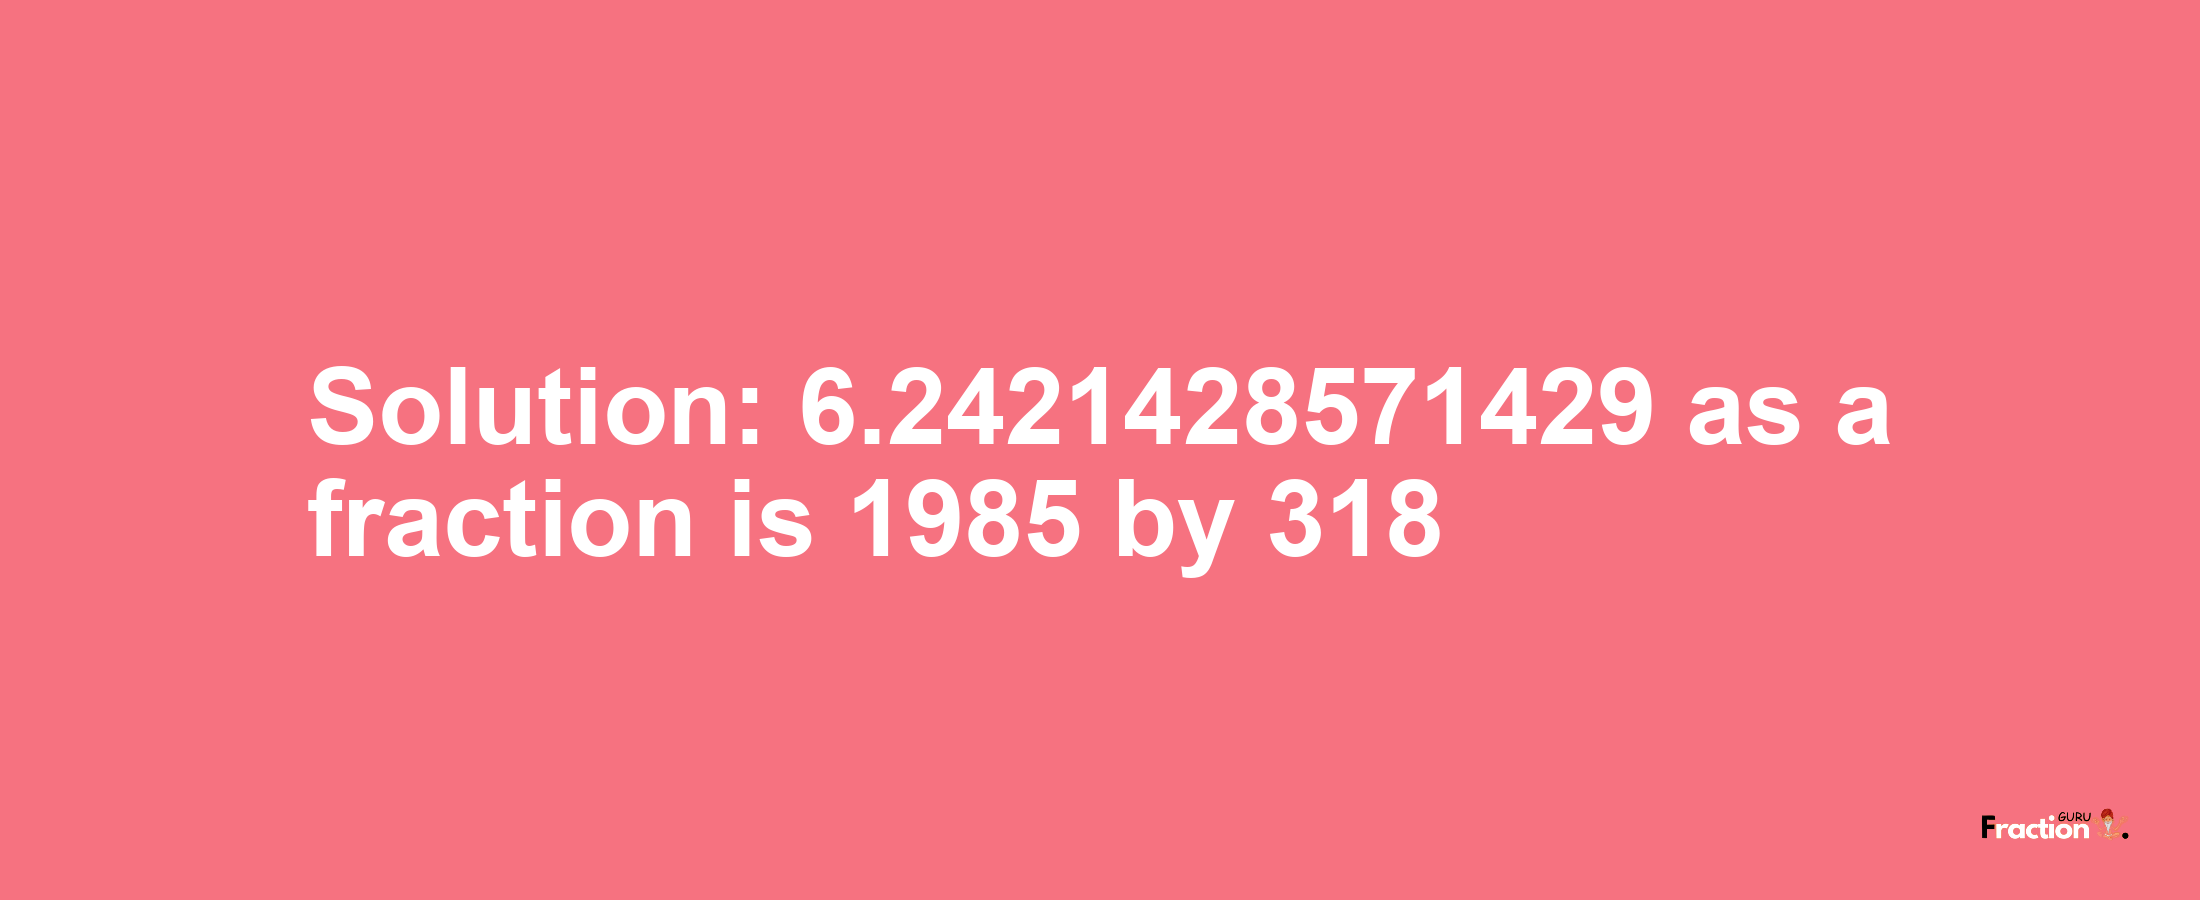 Solution:6.2421428571429 as a fraction is 1985/318